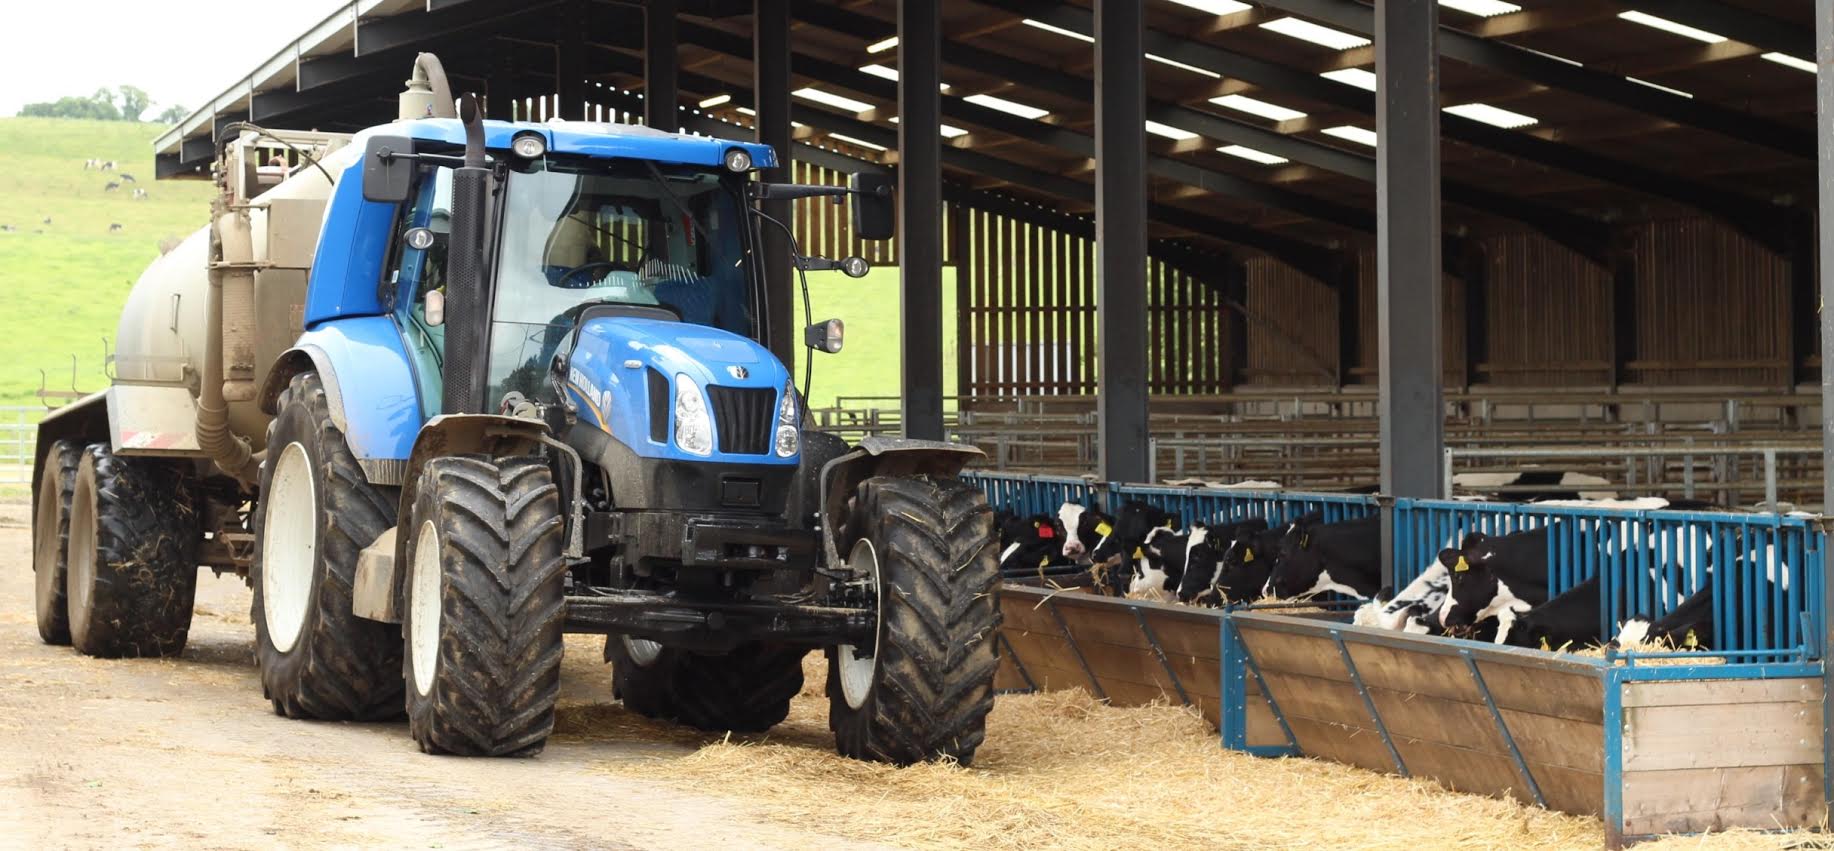 Testing of the T6.180 Methane Power tractor continues around Europe